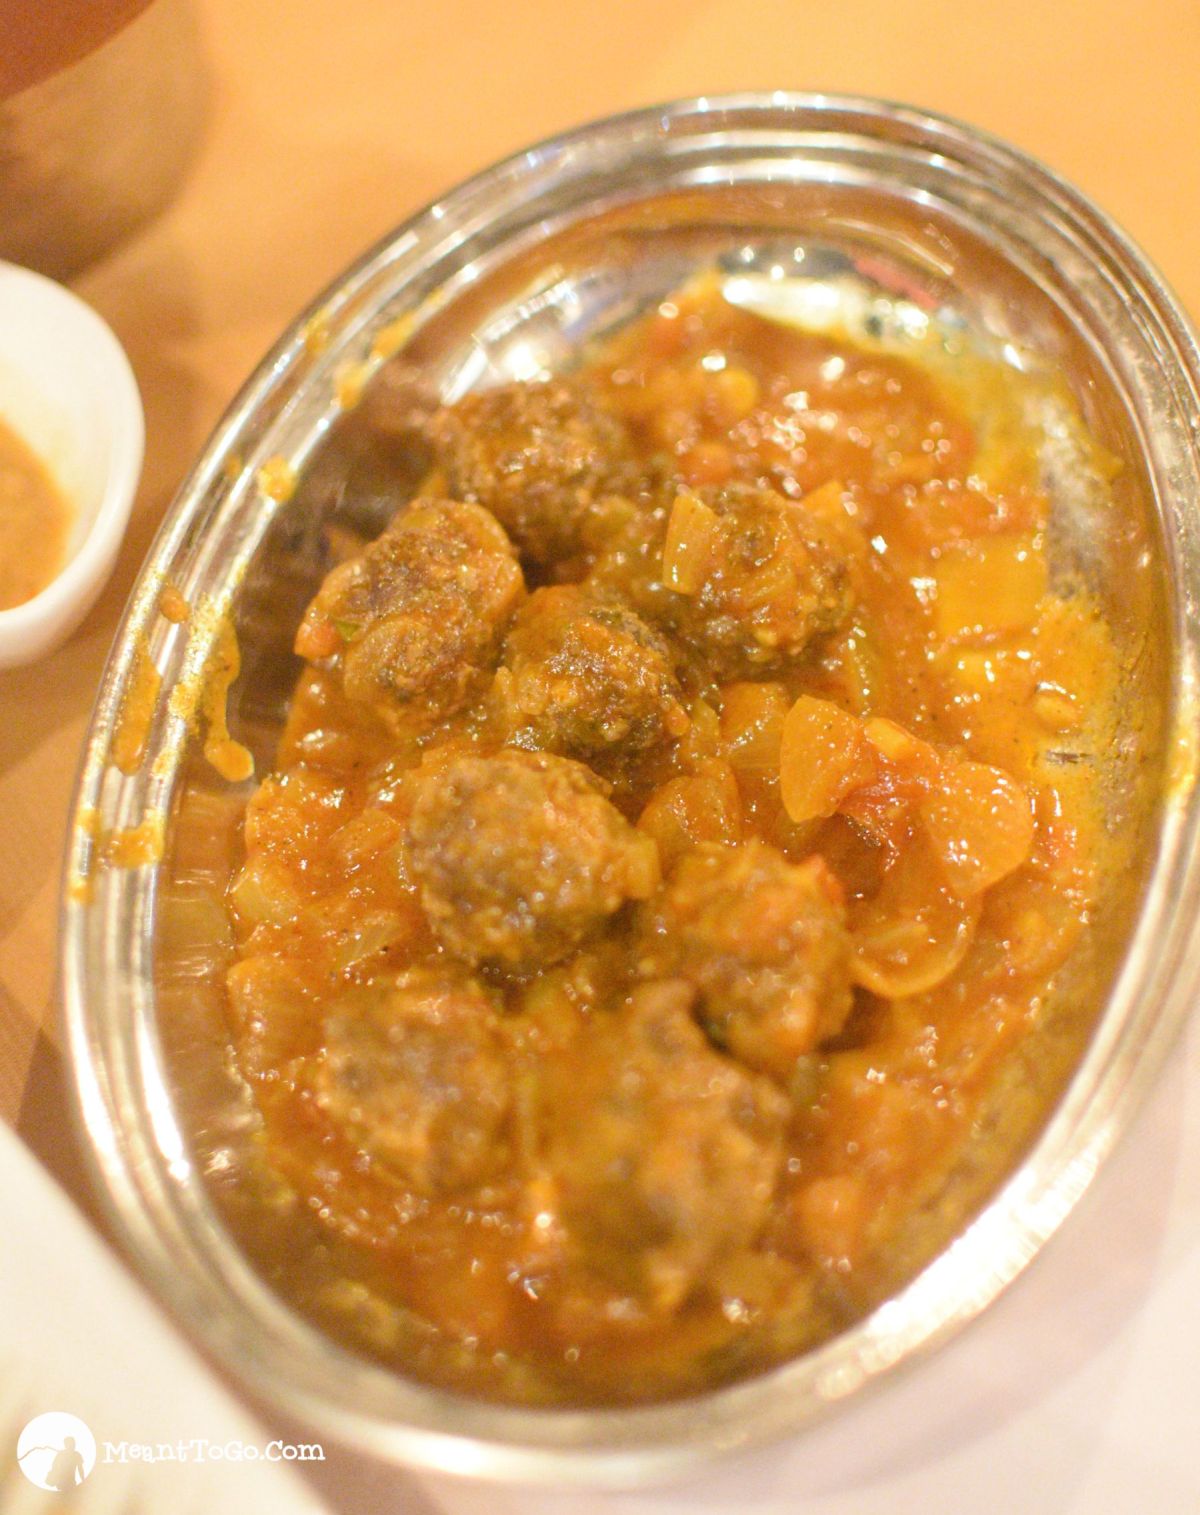 Kofta Curry (Meatball Curry) served at the 5S Box Indian Restaurant in Davao City